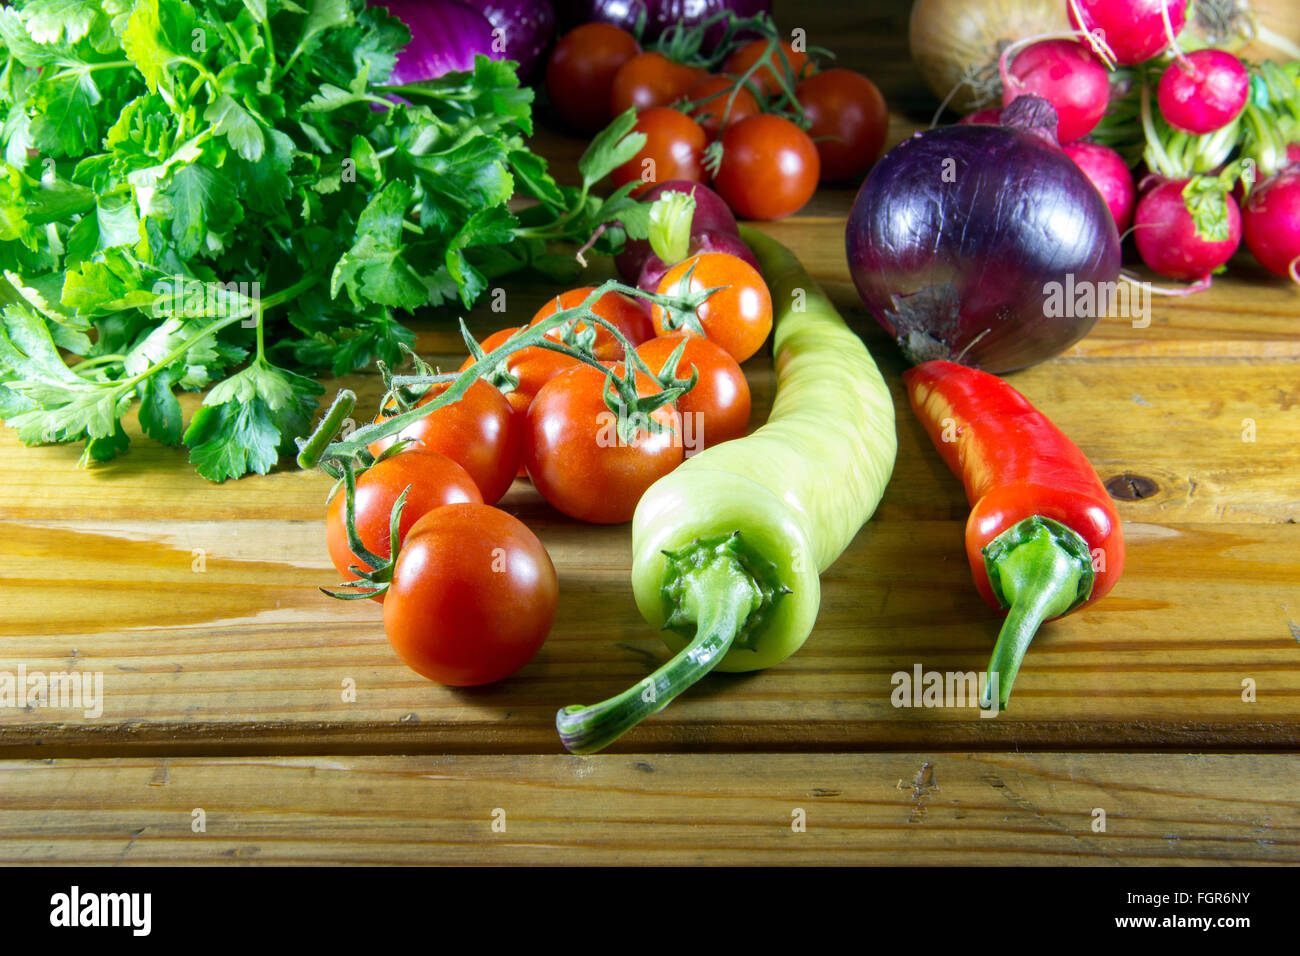 Peppers, tomato, radish, parsley and onions scattered on an old wooden table Stock Photo